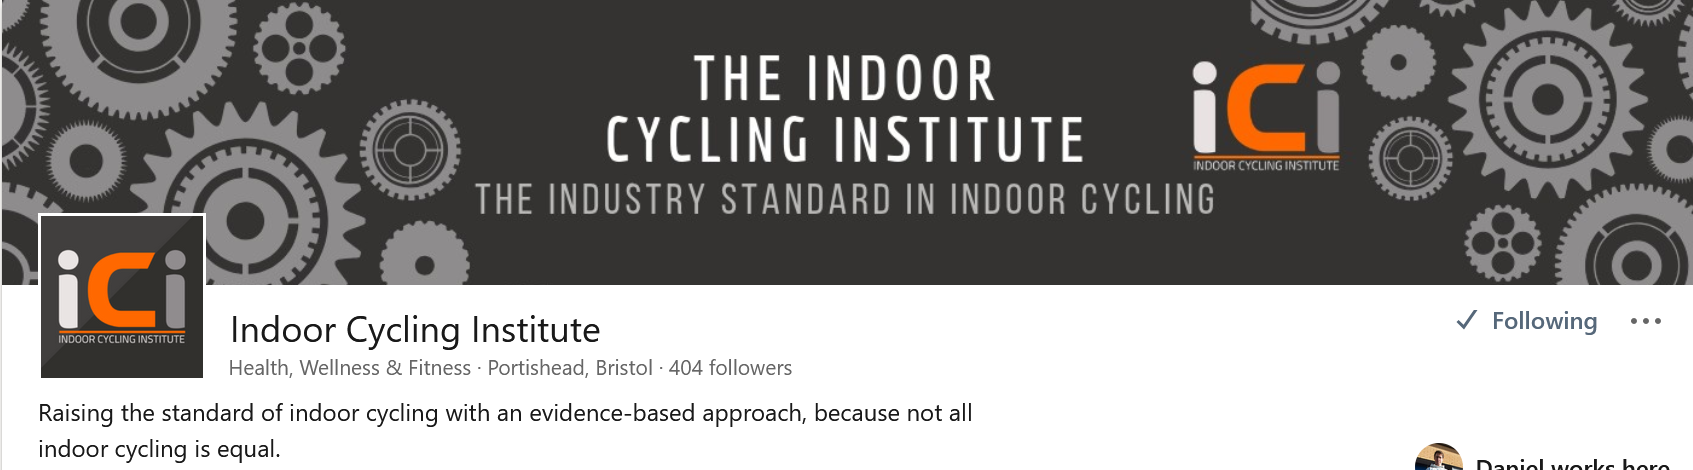 Indoor Cycling Institute on LinkedIn